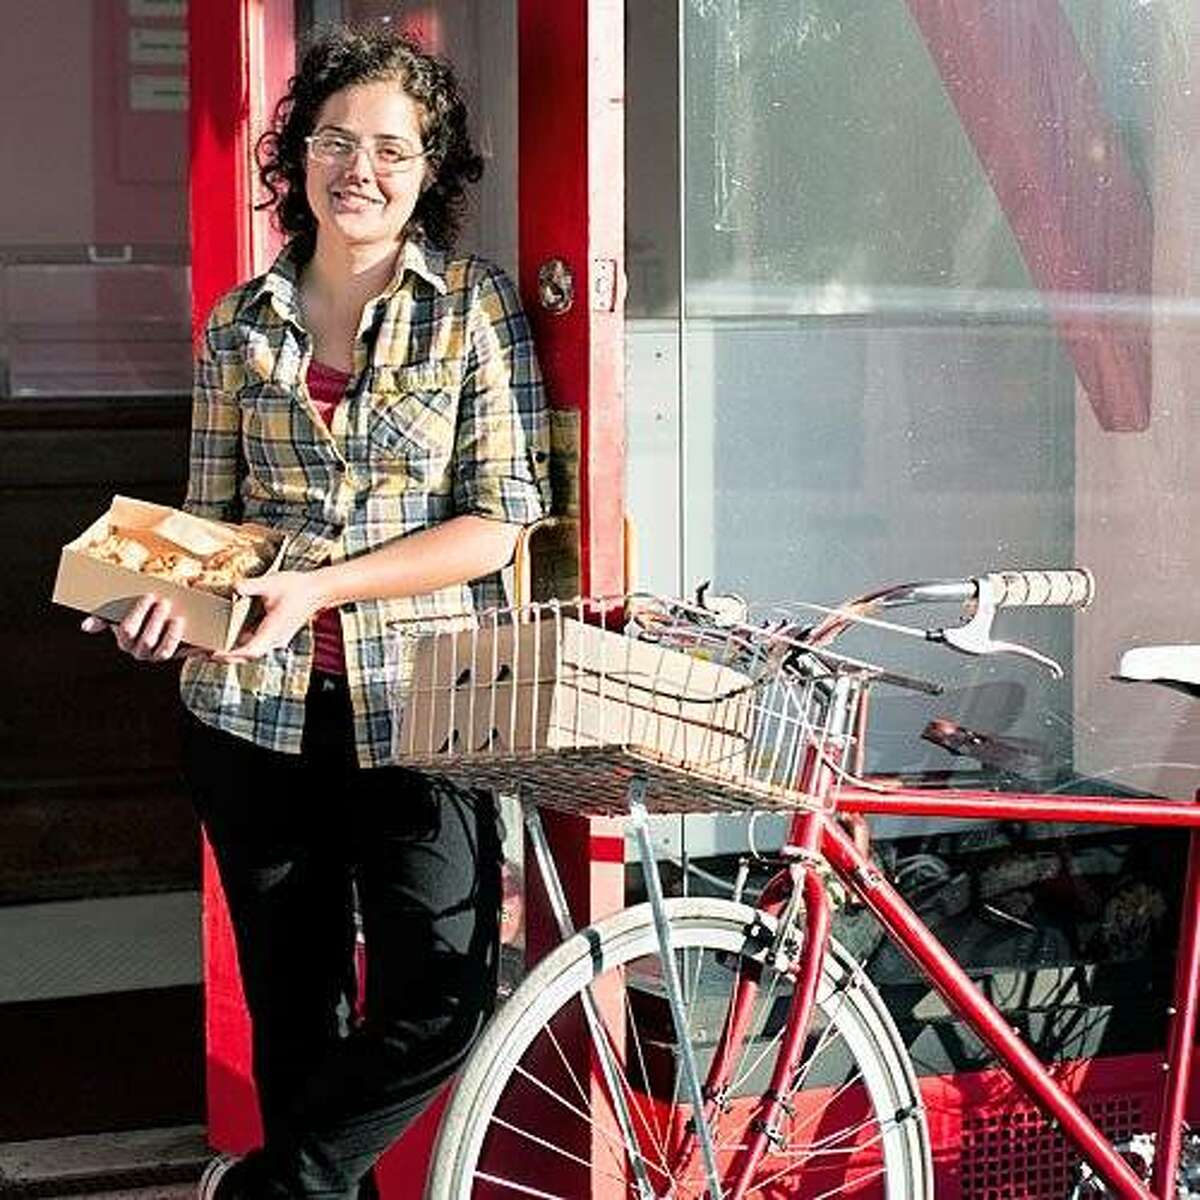 Bike Basket Pies, San Francisco: Every week, the one-woman operation delivers cupcake-size pies all over town. bikebasketpies.com